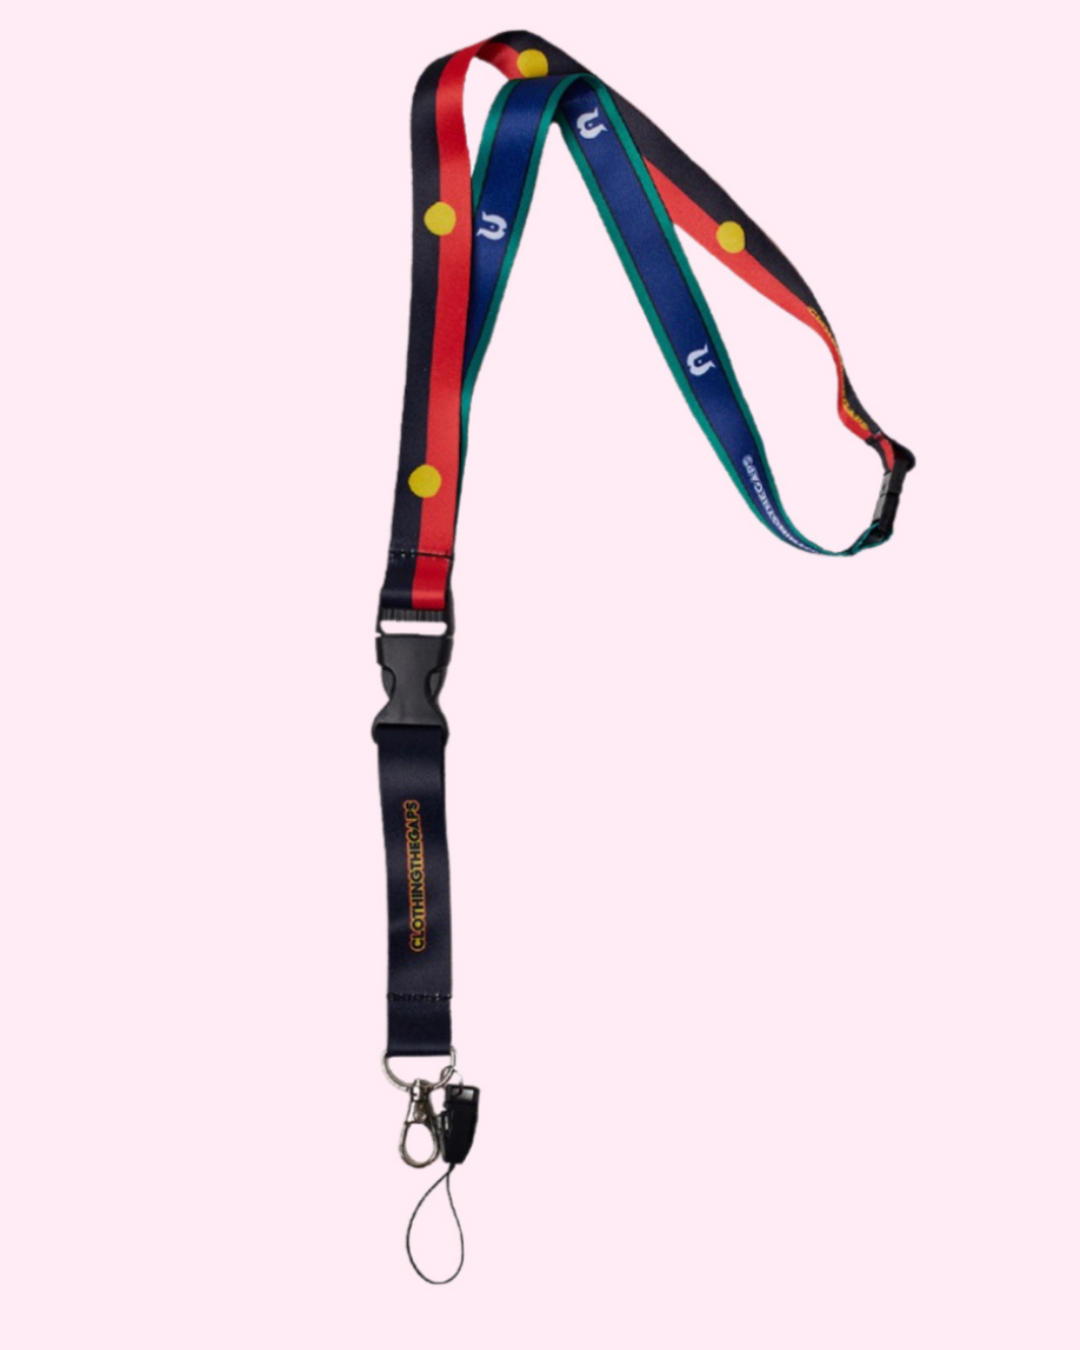 Clothing The Gaps. First Nations Flags Lanyard. Features both the coloured Aboriginal and Torres Strait Islander Flags with a black clip at back of neck and half way down to detach keys. At end of lanyard is a silver metal clip to attach what you would like.